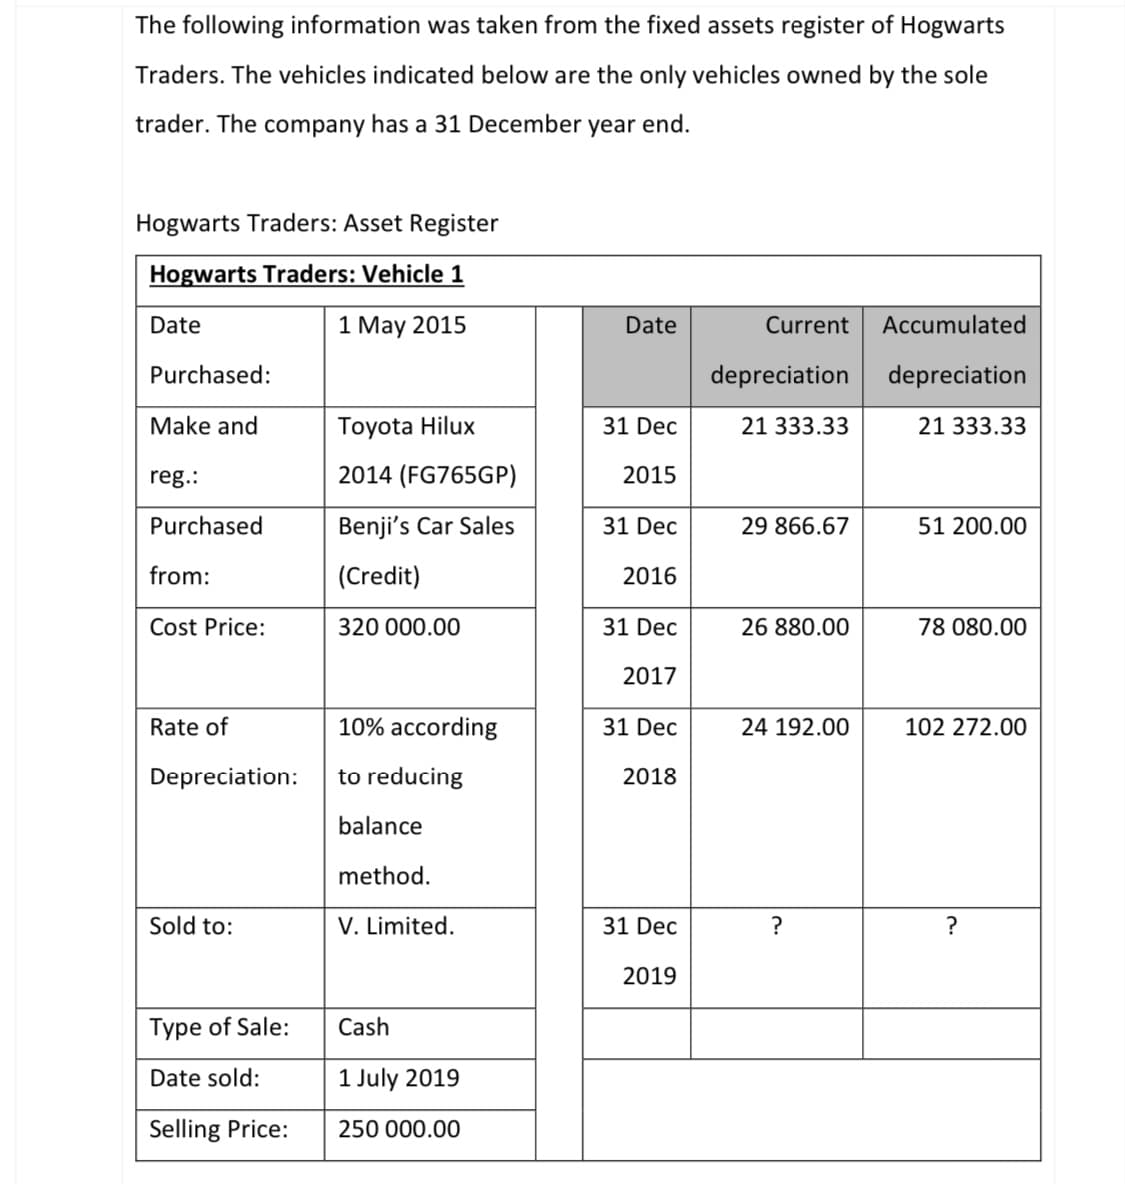 The following information was taken from the fixed assets register of Hogwarts
Traders. The vehicles indicated below are the only vehicles owned by the sole
trader. The company has a 31 December year end.
Hogwarts Traders: Asset Register
Hogwarts Traders: Vehicle 1
Date
1 May 2015
Date
Current
Accumulated
Purchased:
depreciation
depreciation
Make and
Toyota Hilux
31 Dec
21 333.33
21 333.33
reg.:
2014 (FG765GP)
2015
Purchased
Benji's Car Sales
31 Dec
29 866.67
51 200.00
from:
(Credit)
2016
Cost Price:
320 000.00
31 Dec
26 880.00
78 080.00
2017
Rate of
10% according
31 Dec
24 192.00
102 272.00
Depreciation:
to reducing
2018
balance
method.
Sold to:
V. Limited.
31 Dec
?
?
2019
Type of Sale:
Cash
Date sold:
1 July 2019
Selling Price:
250 000.00
